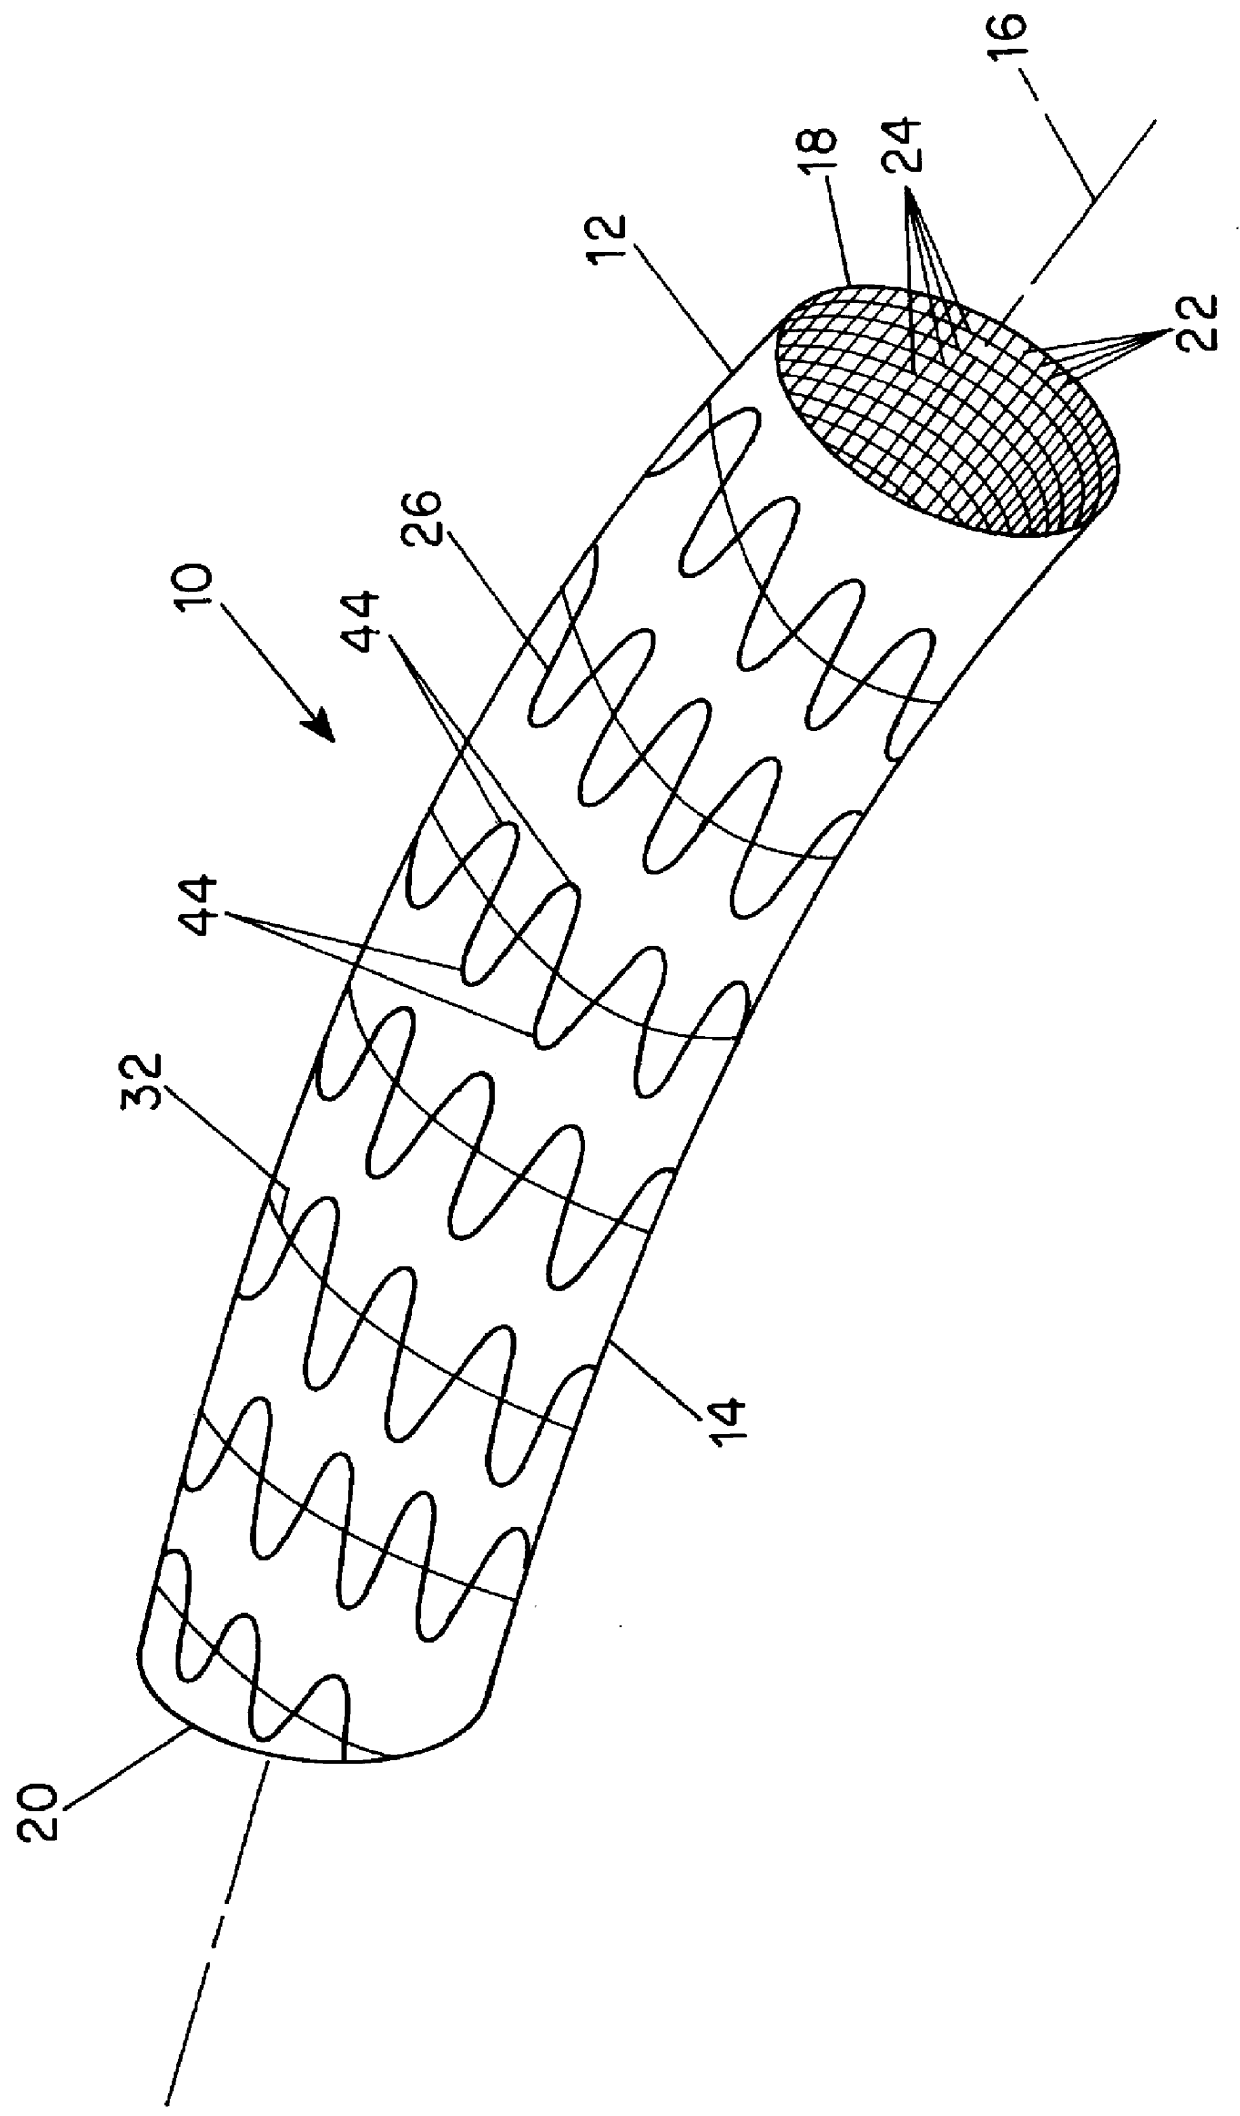 Woven stent/graft structure